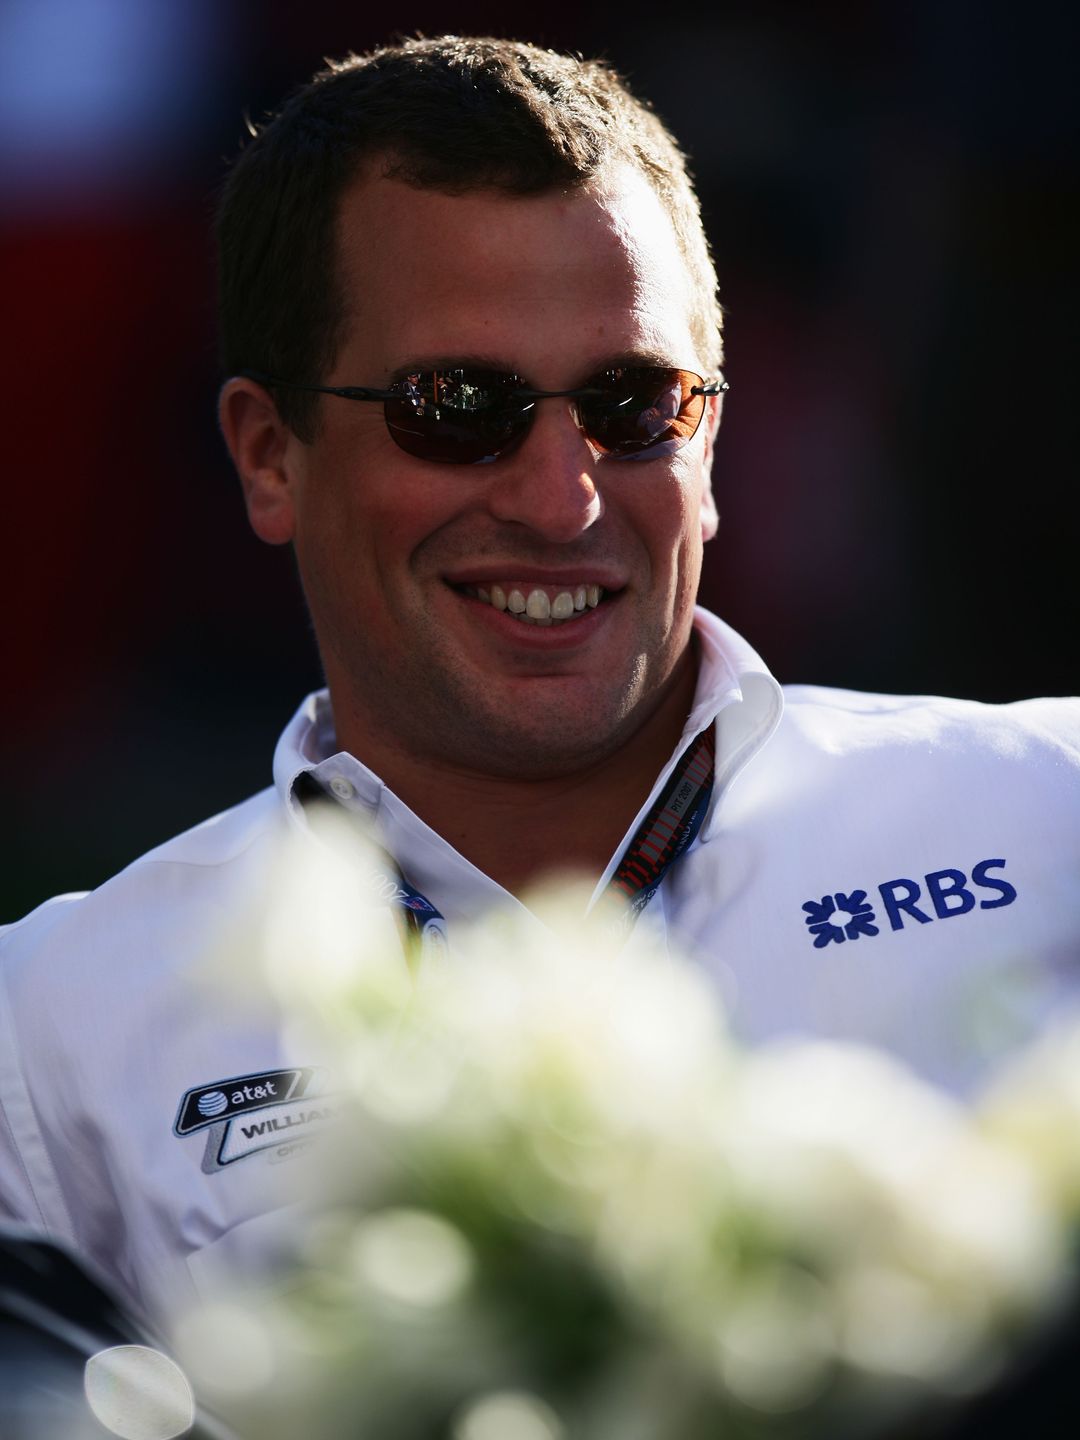 Peter Phillips smiling in a white sports shirt and sunglasses